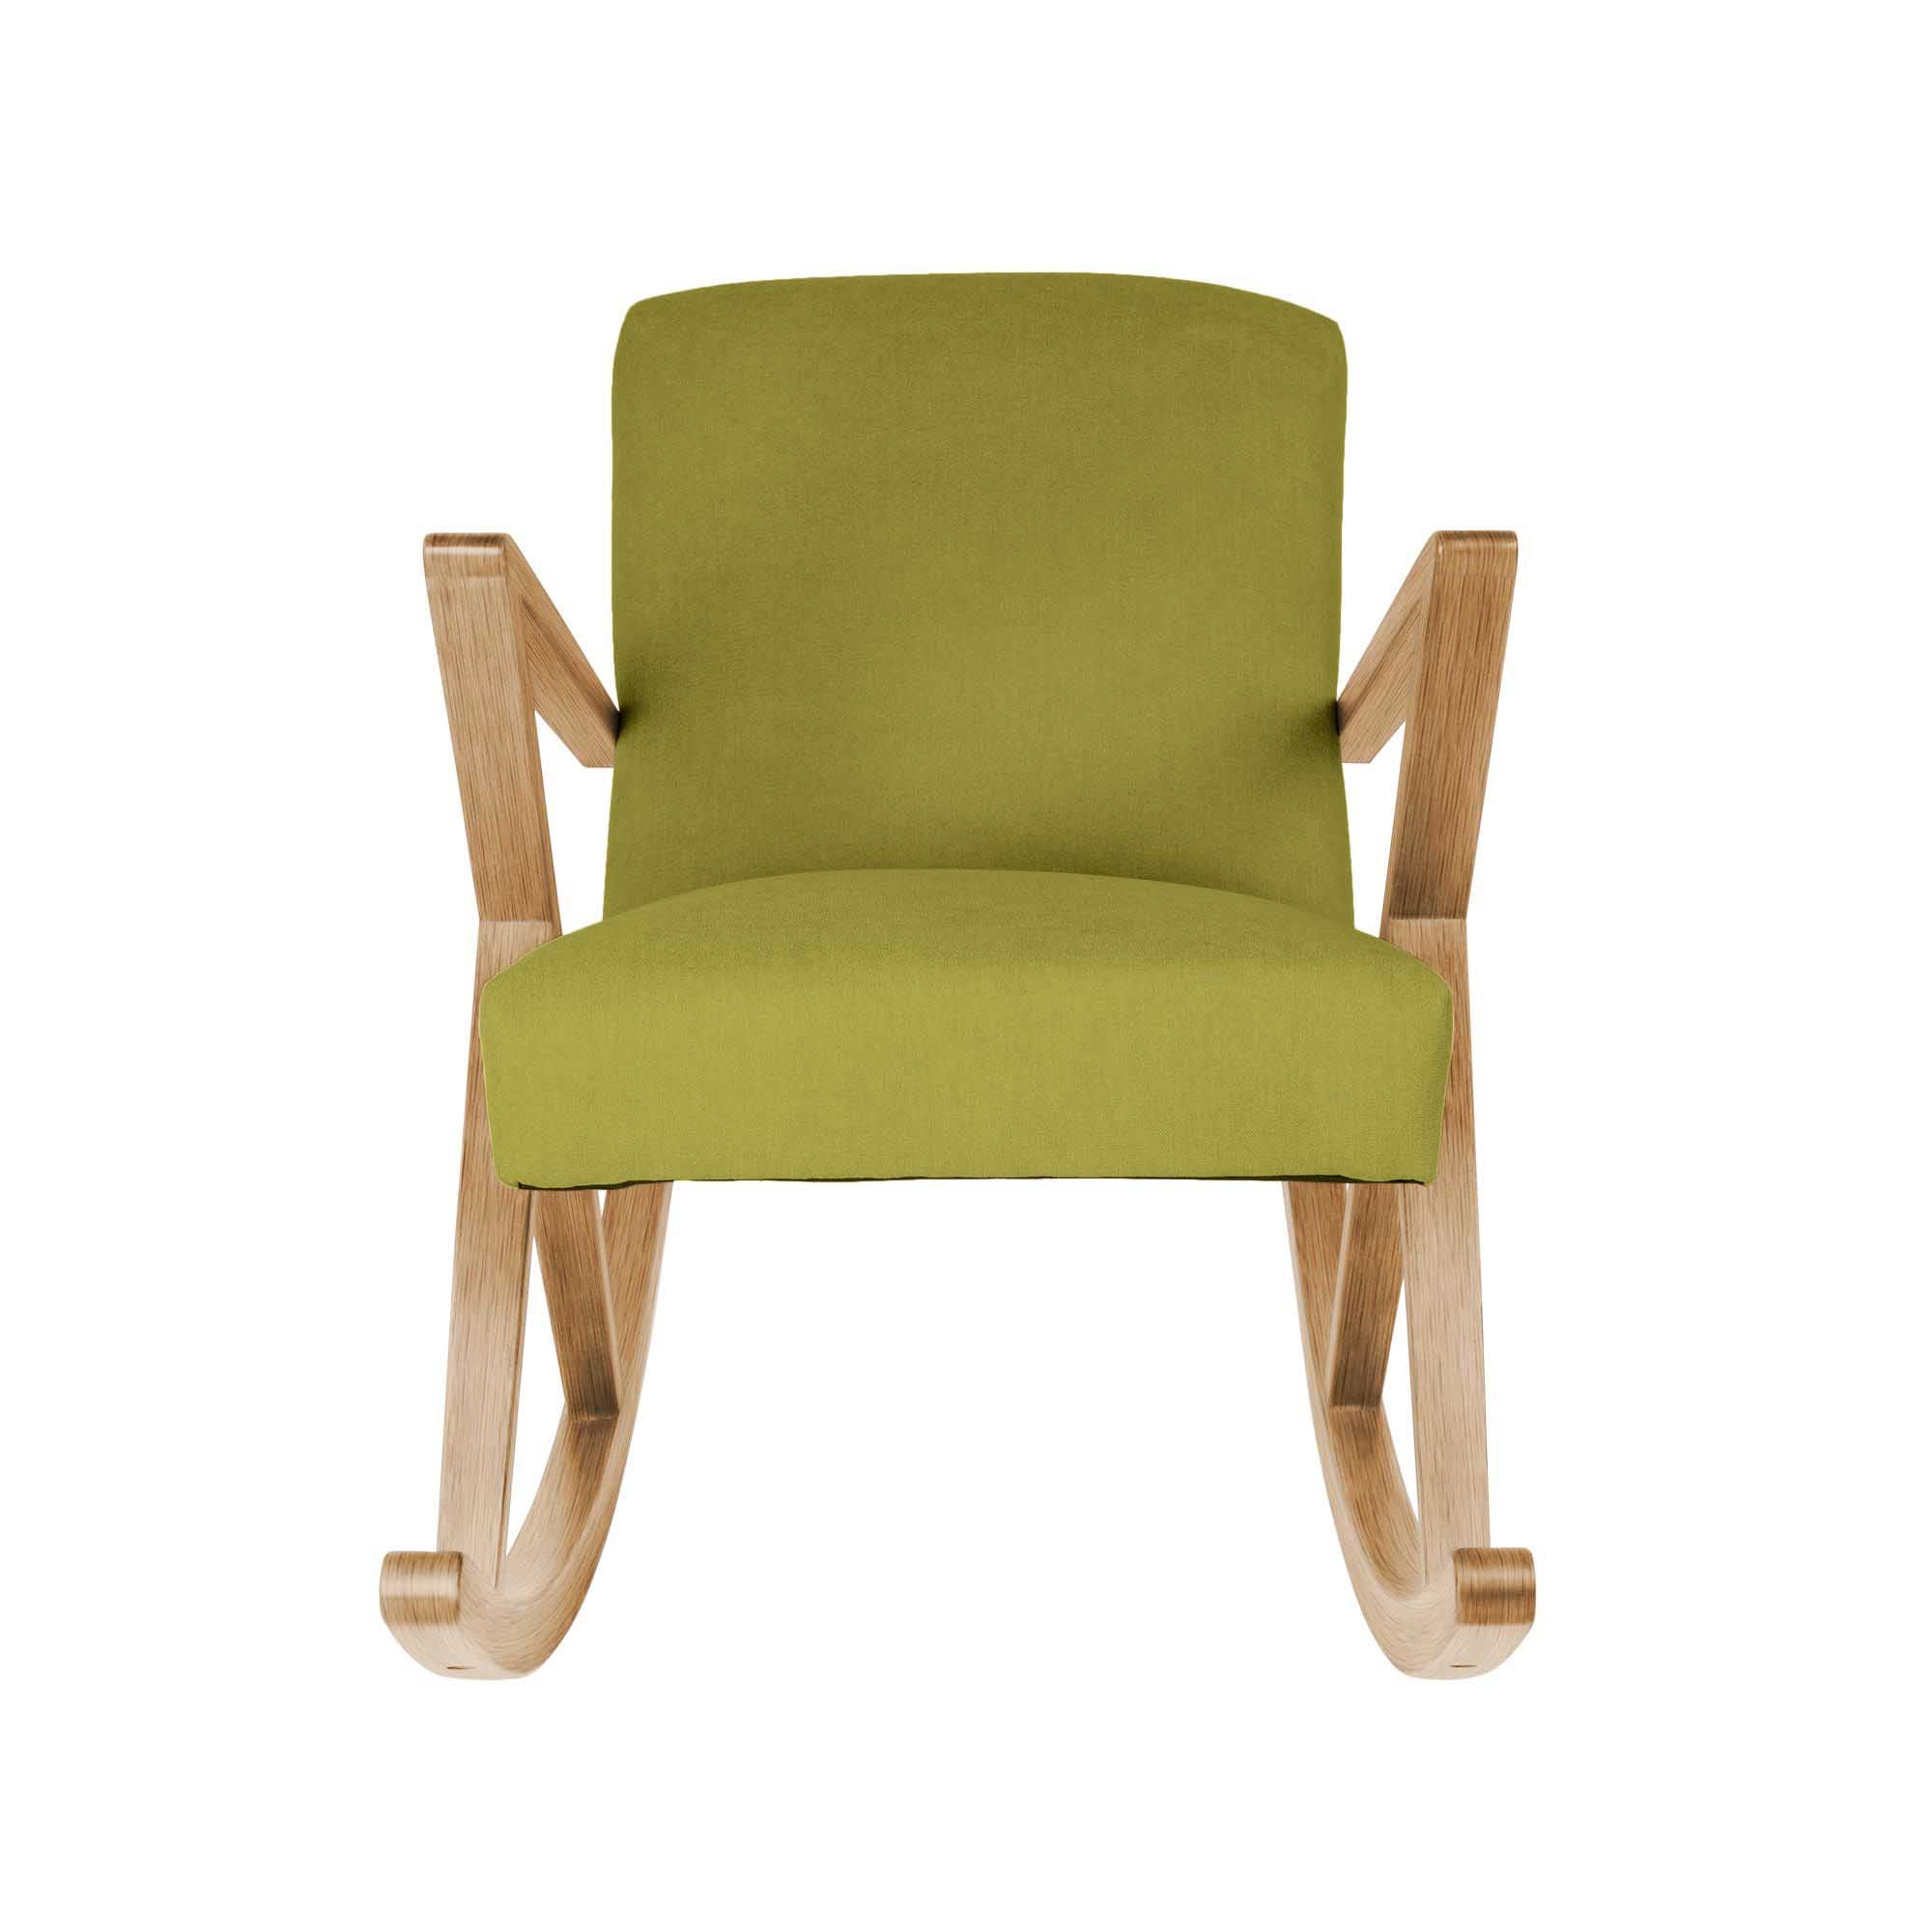 Rocking Chair, Oak Wood Frame, Natural Colour green fabric, front view